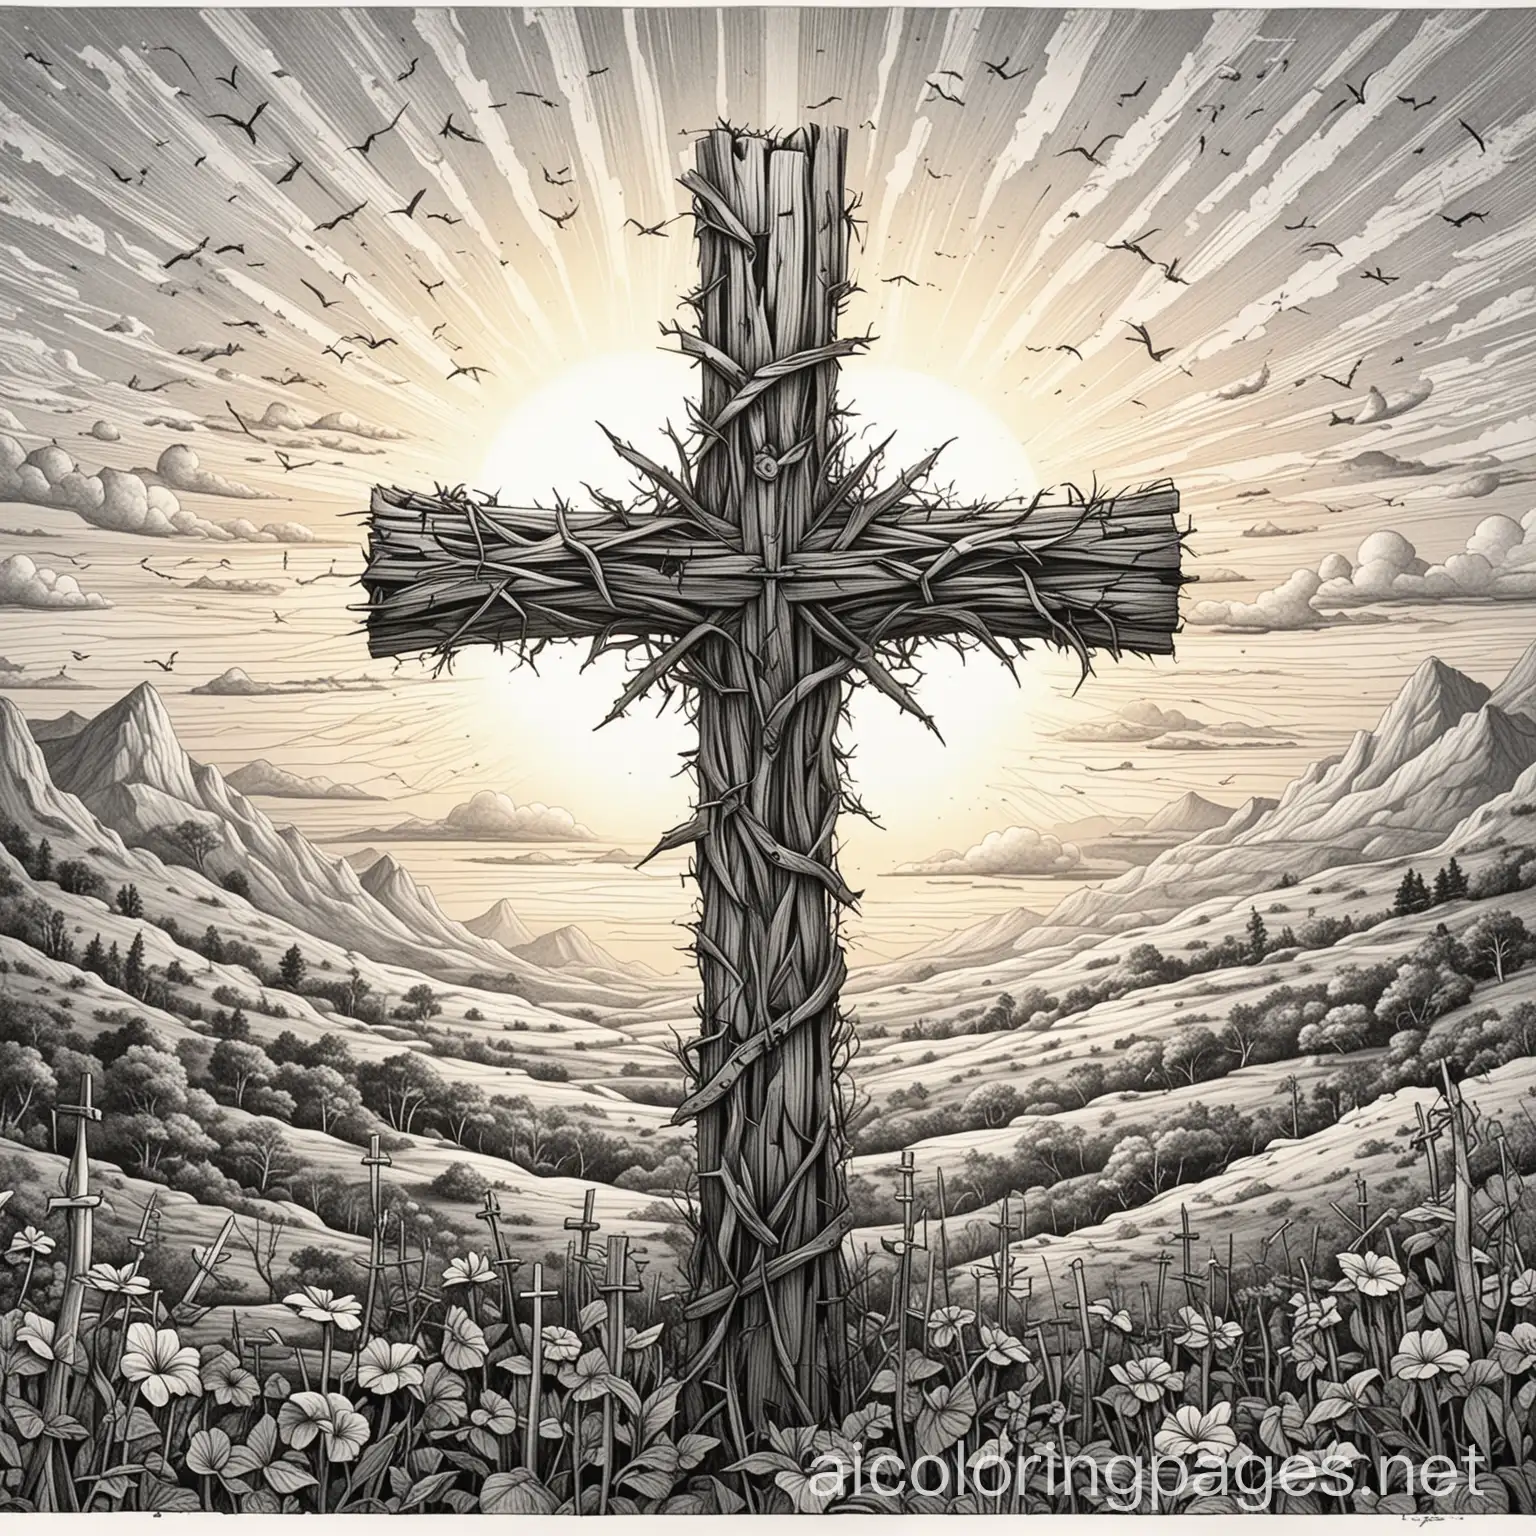 A cross, in the sunset, made out of thorns, Coloring Page, black and white, line art, white background, Simplicity, Ample White Space. The background of the coloring page is plain white to make it easy for young children to color within the lines. The outlines of all the subjects are easy to distinguish, making it simple for kids to color without too much difficulty